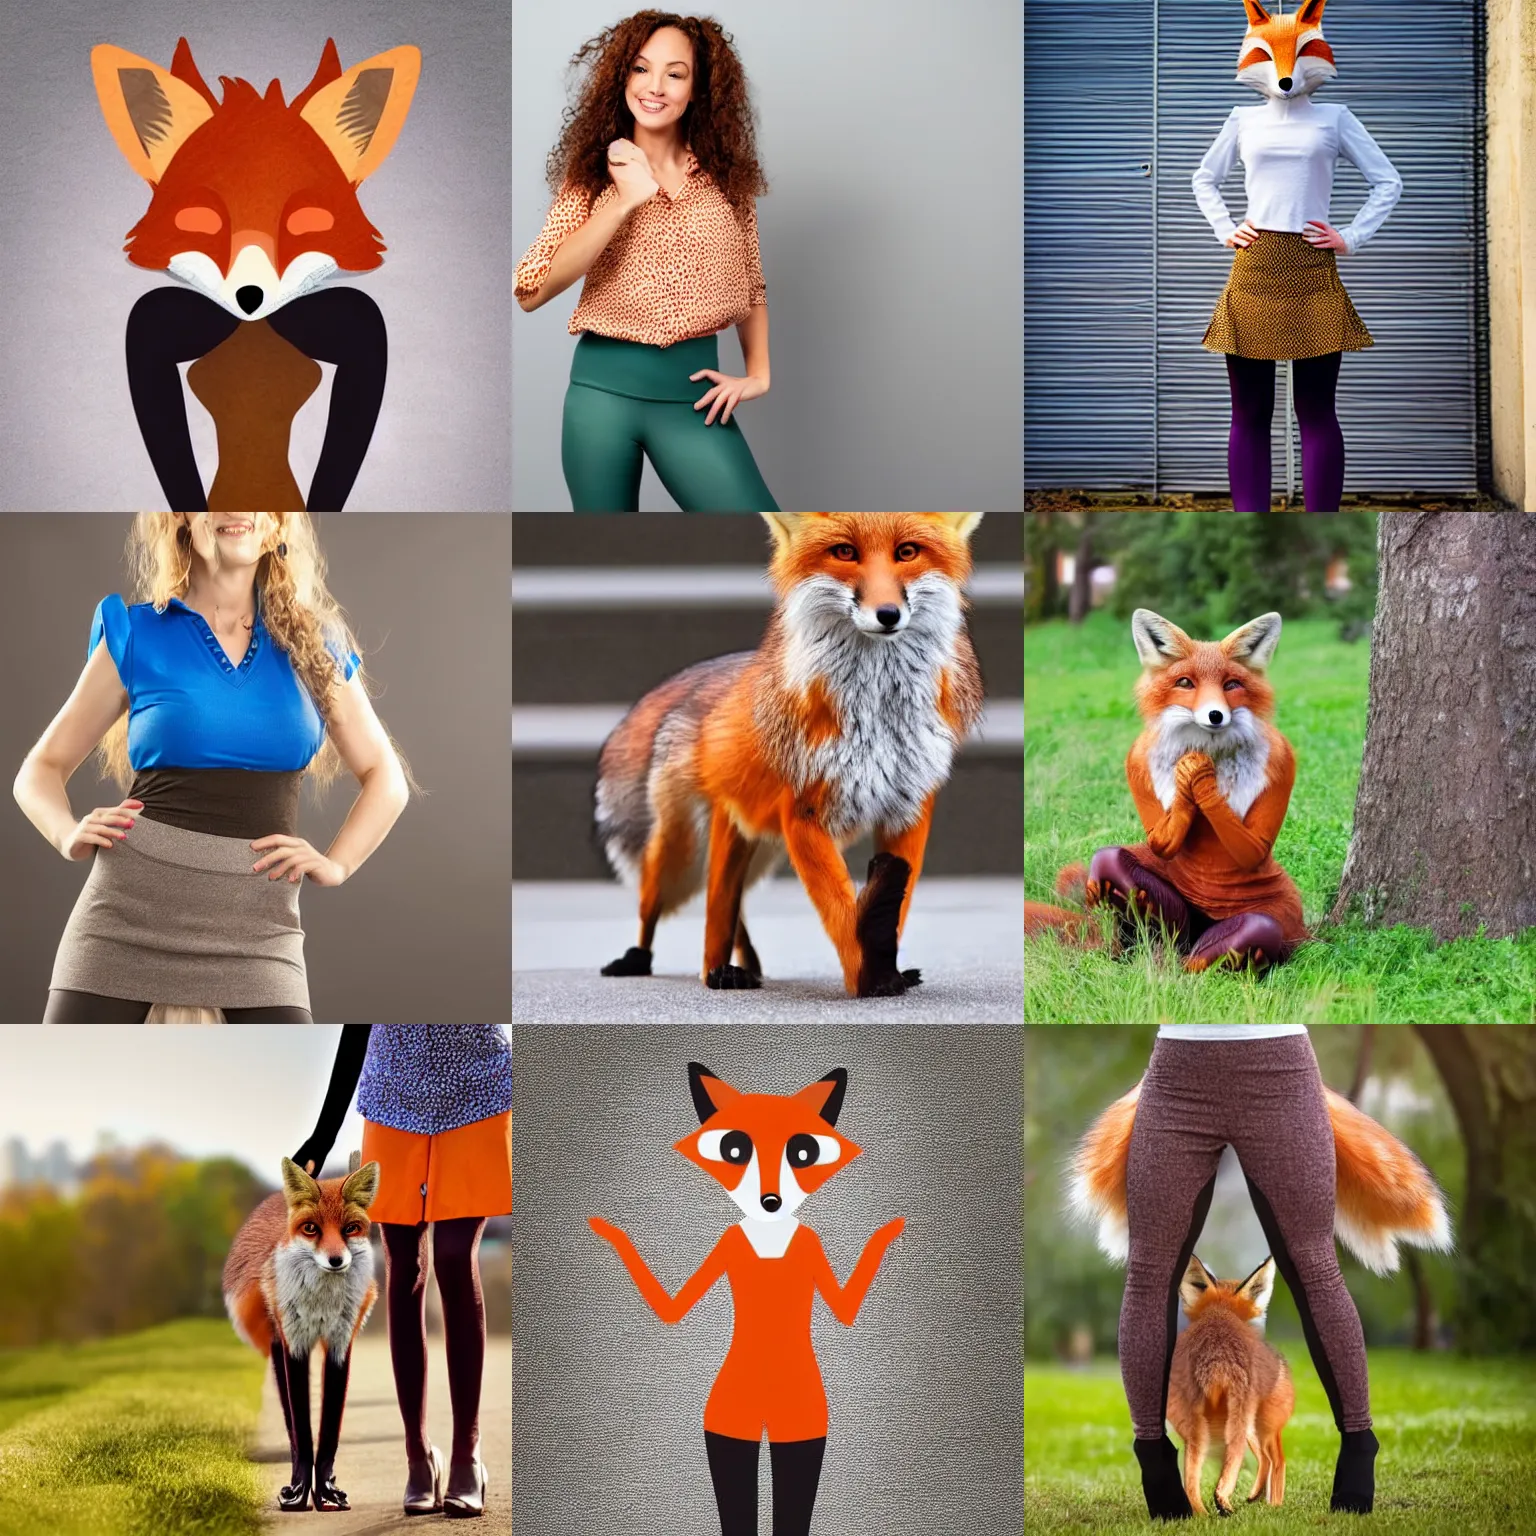 Prompt: shutterstock stock photo of an anthropomorphic fox wearing leggings, a skirt, and a blouse